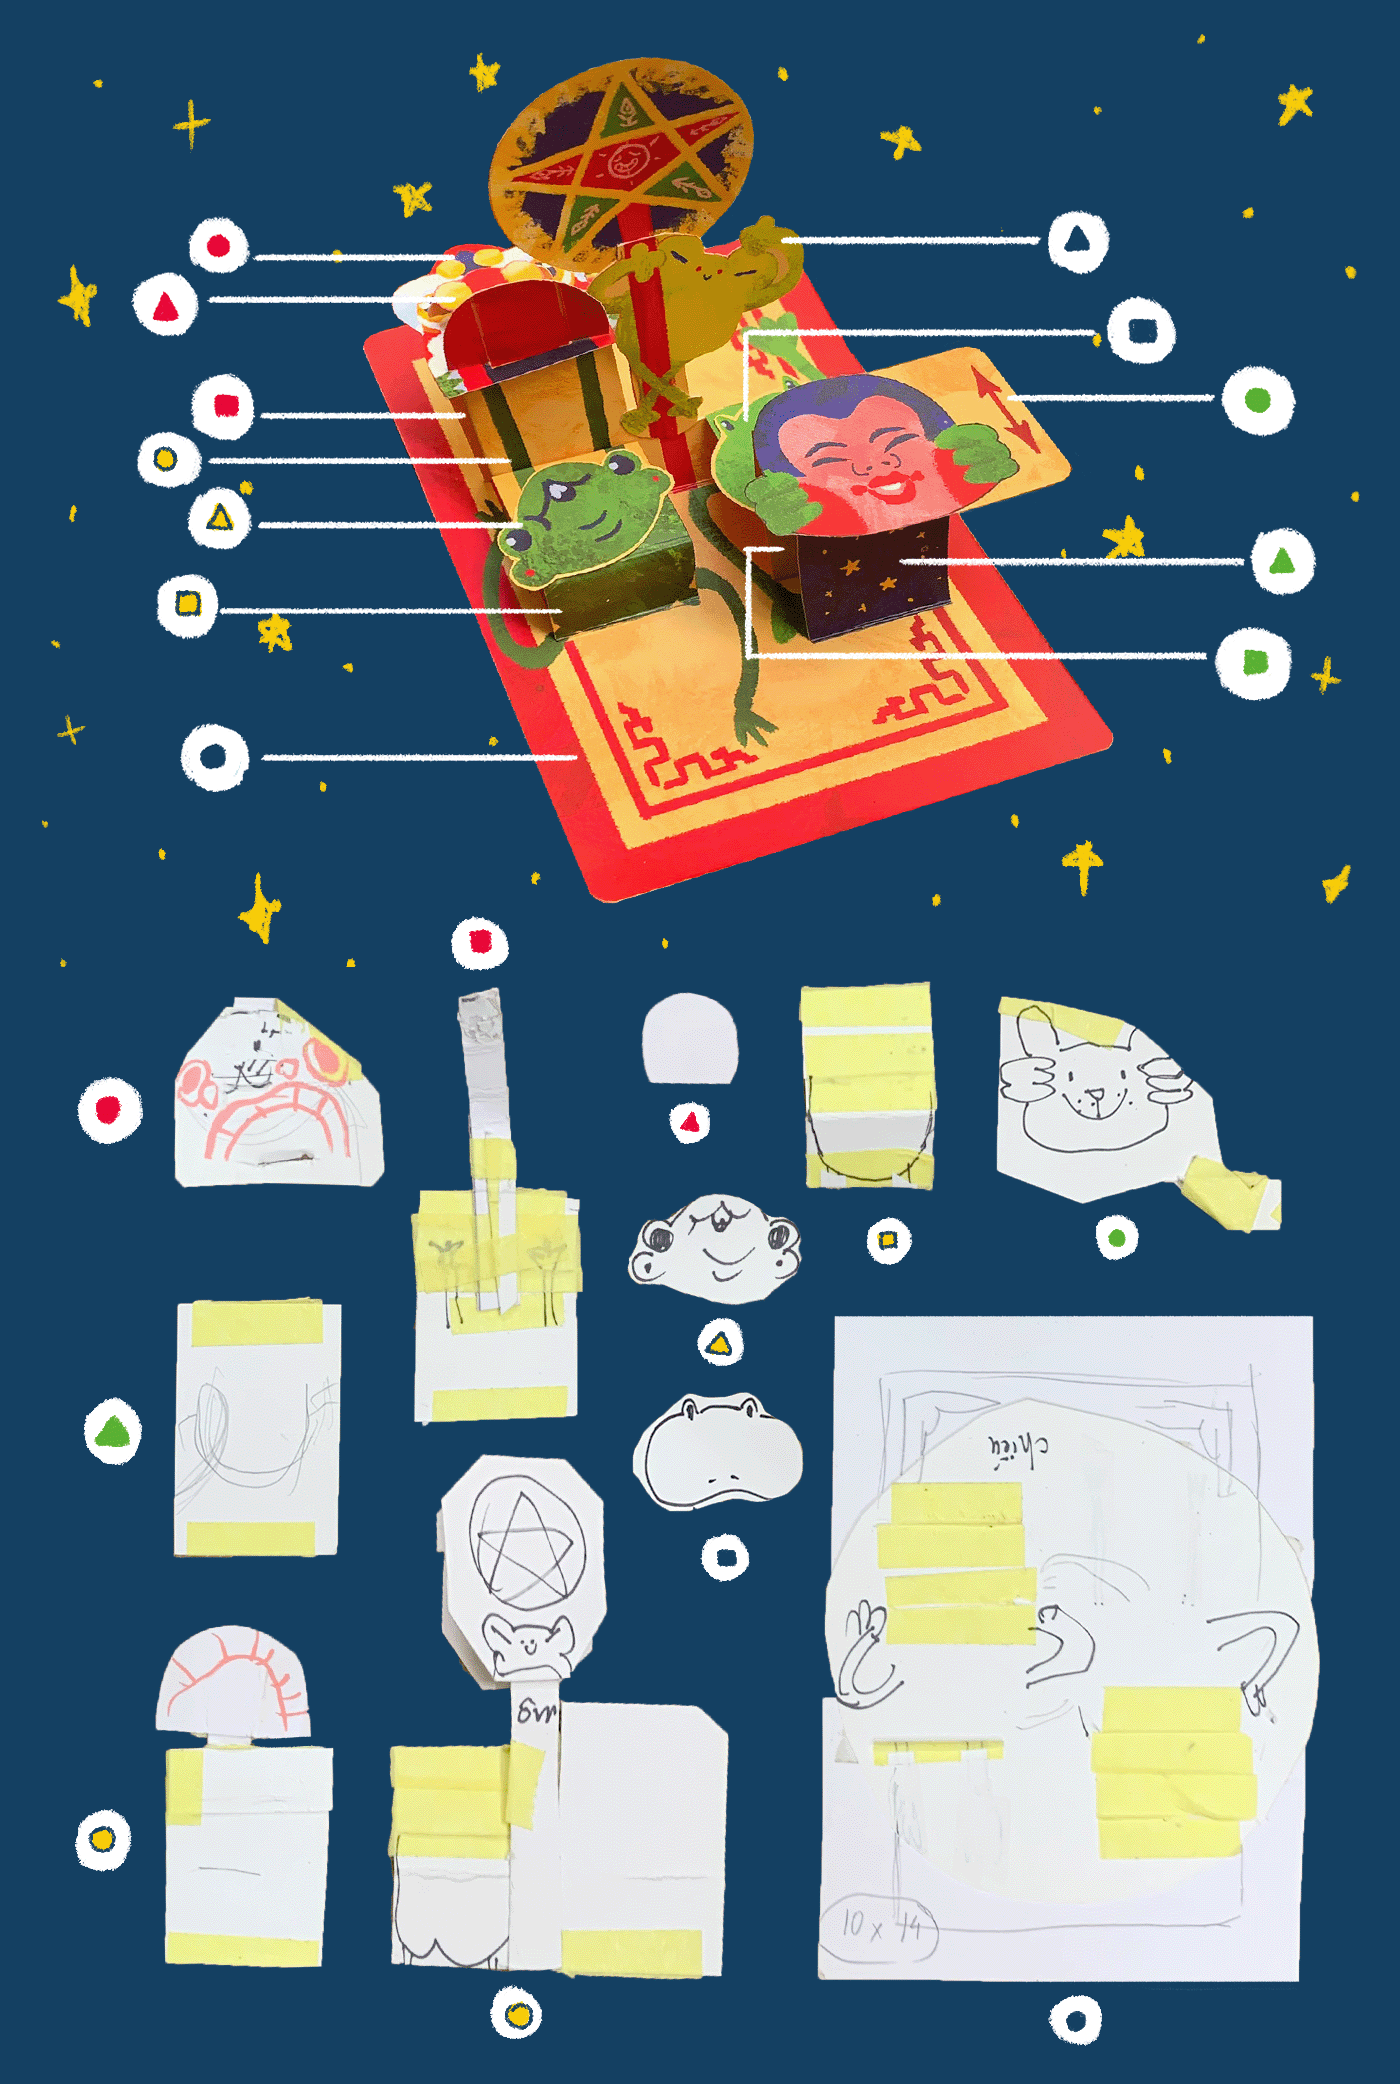 trungthu Mid-Autumn Festival paper engineering pop-up card pop-up book vietnam frogs hanoi ILLUSTRATION  gif